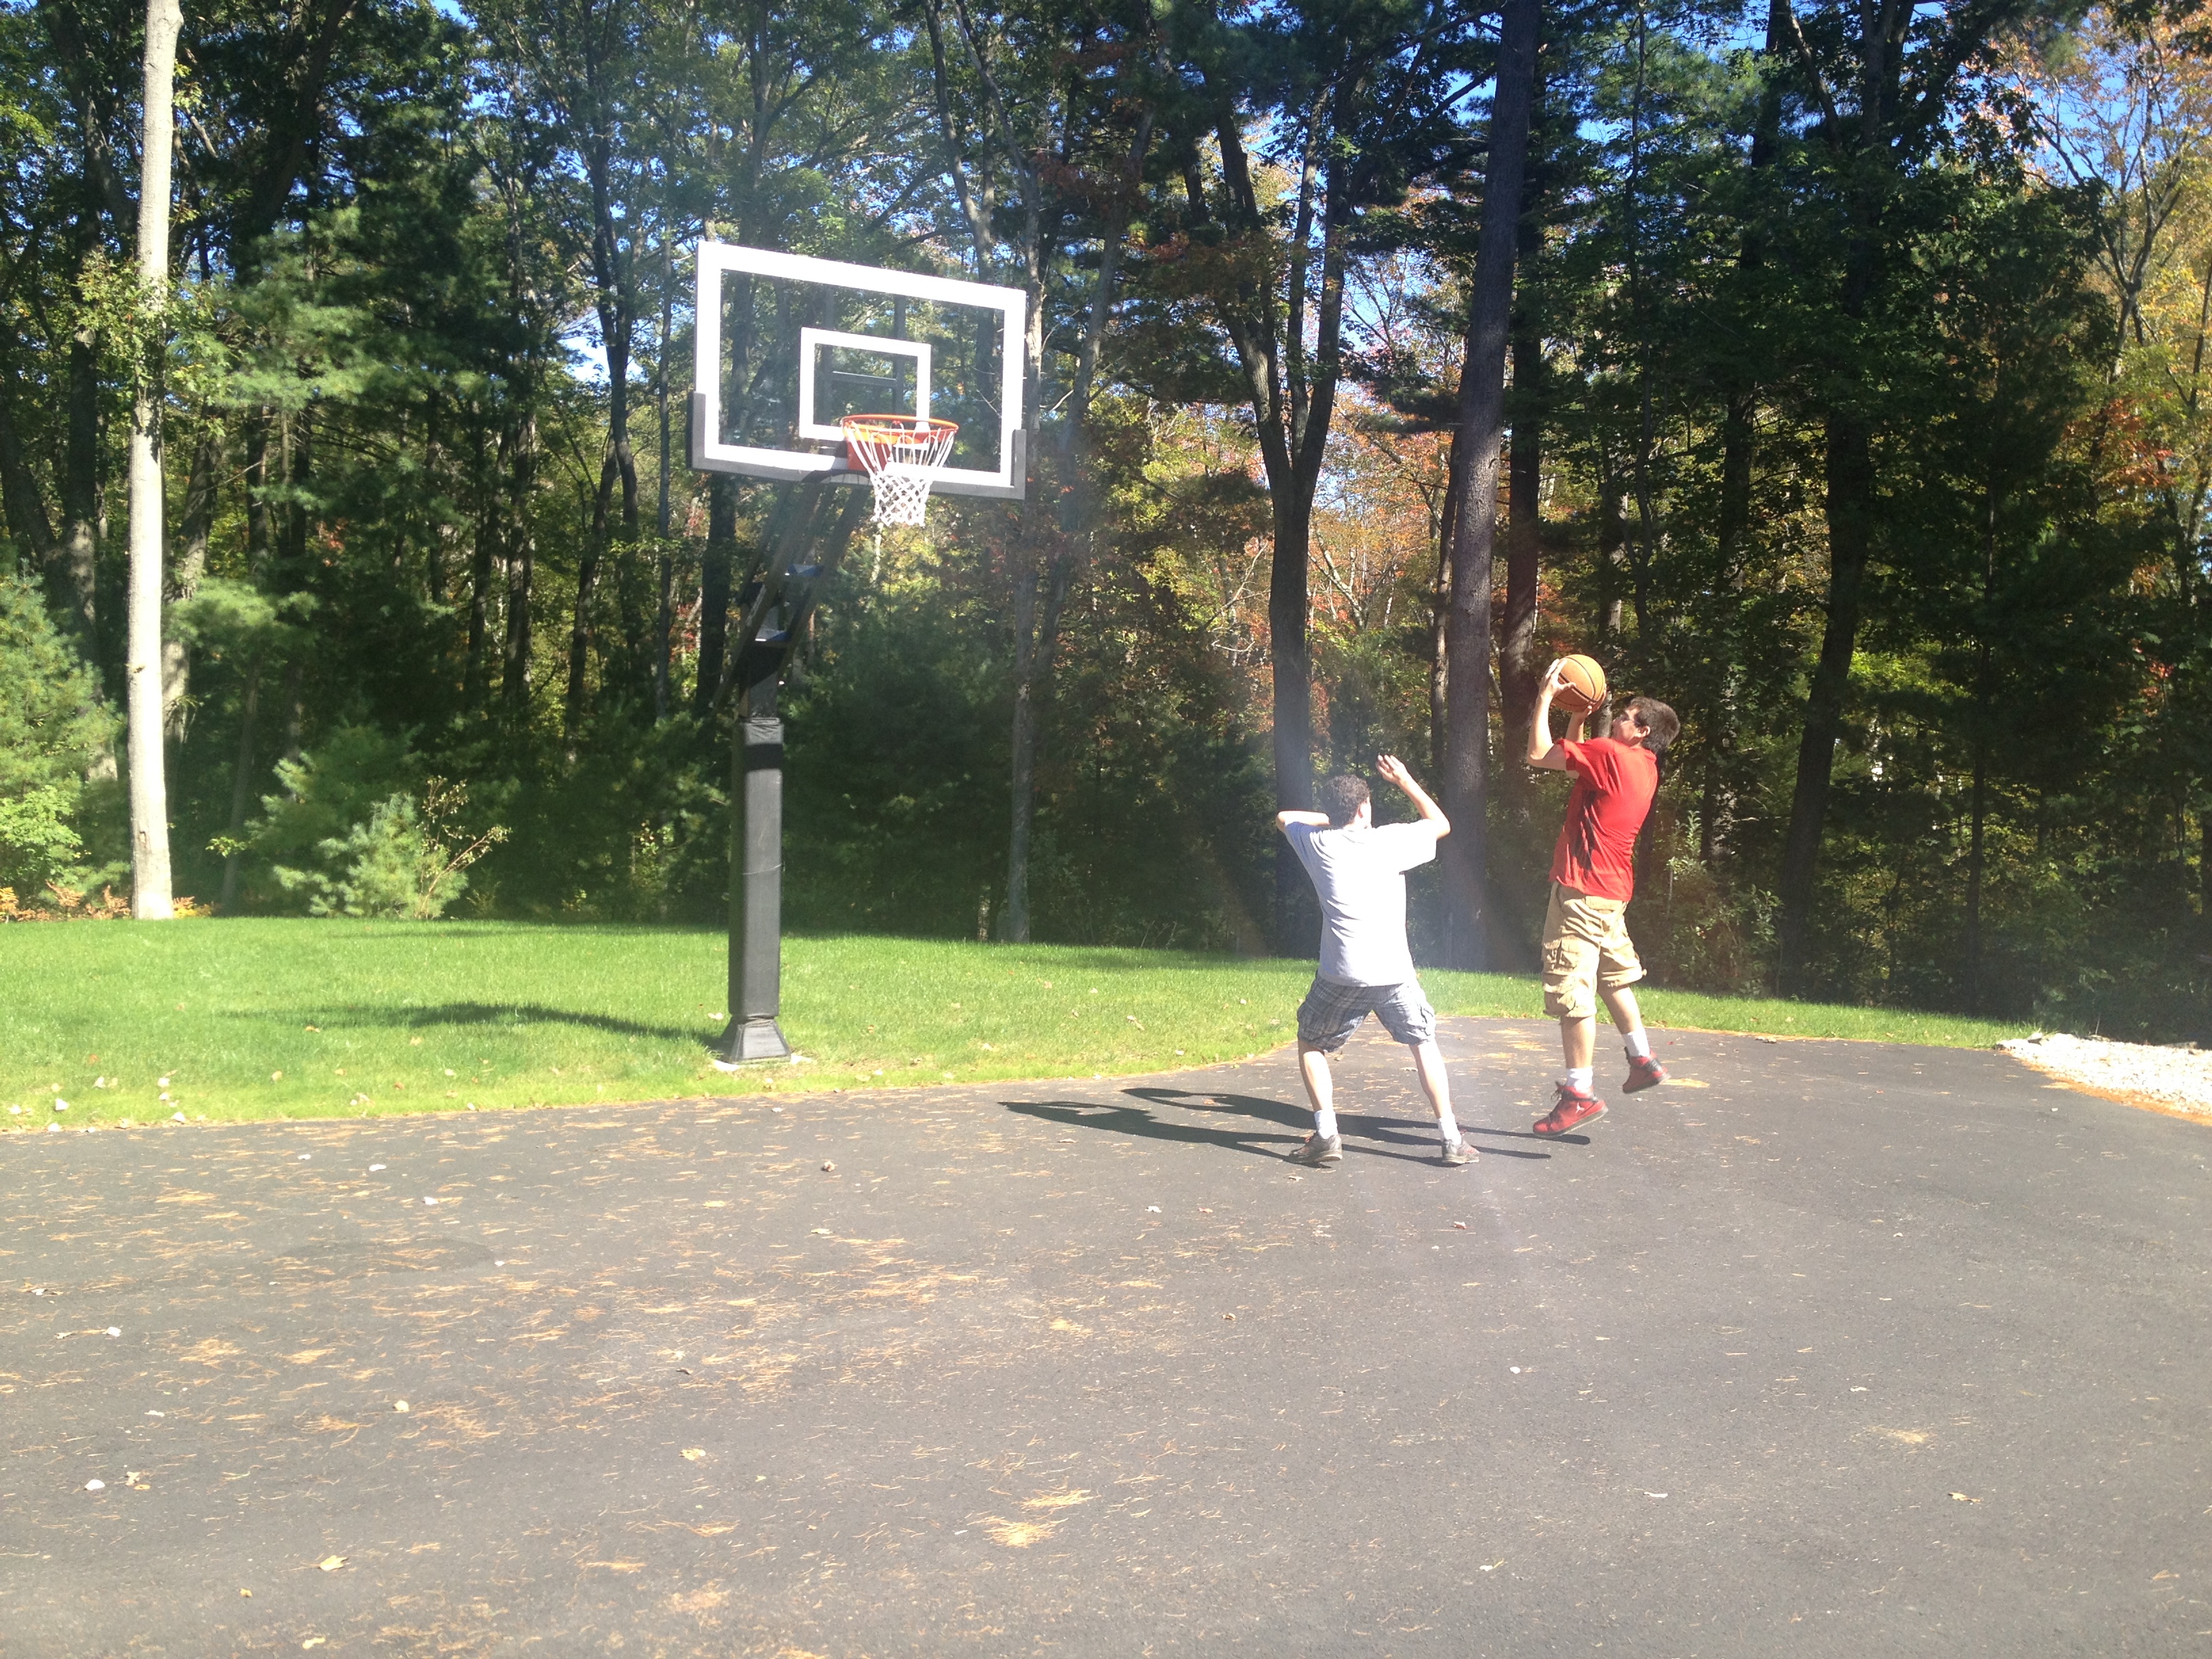 On the right there is a young boy attempting to make his shot at the basket.